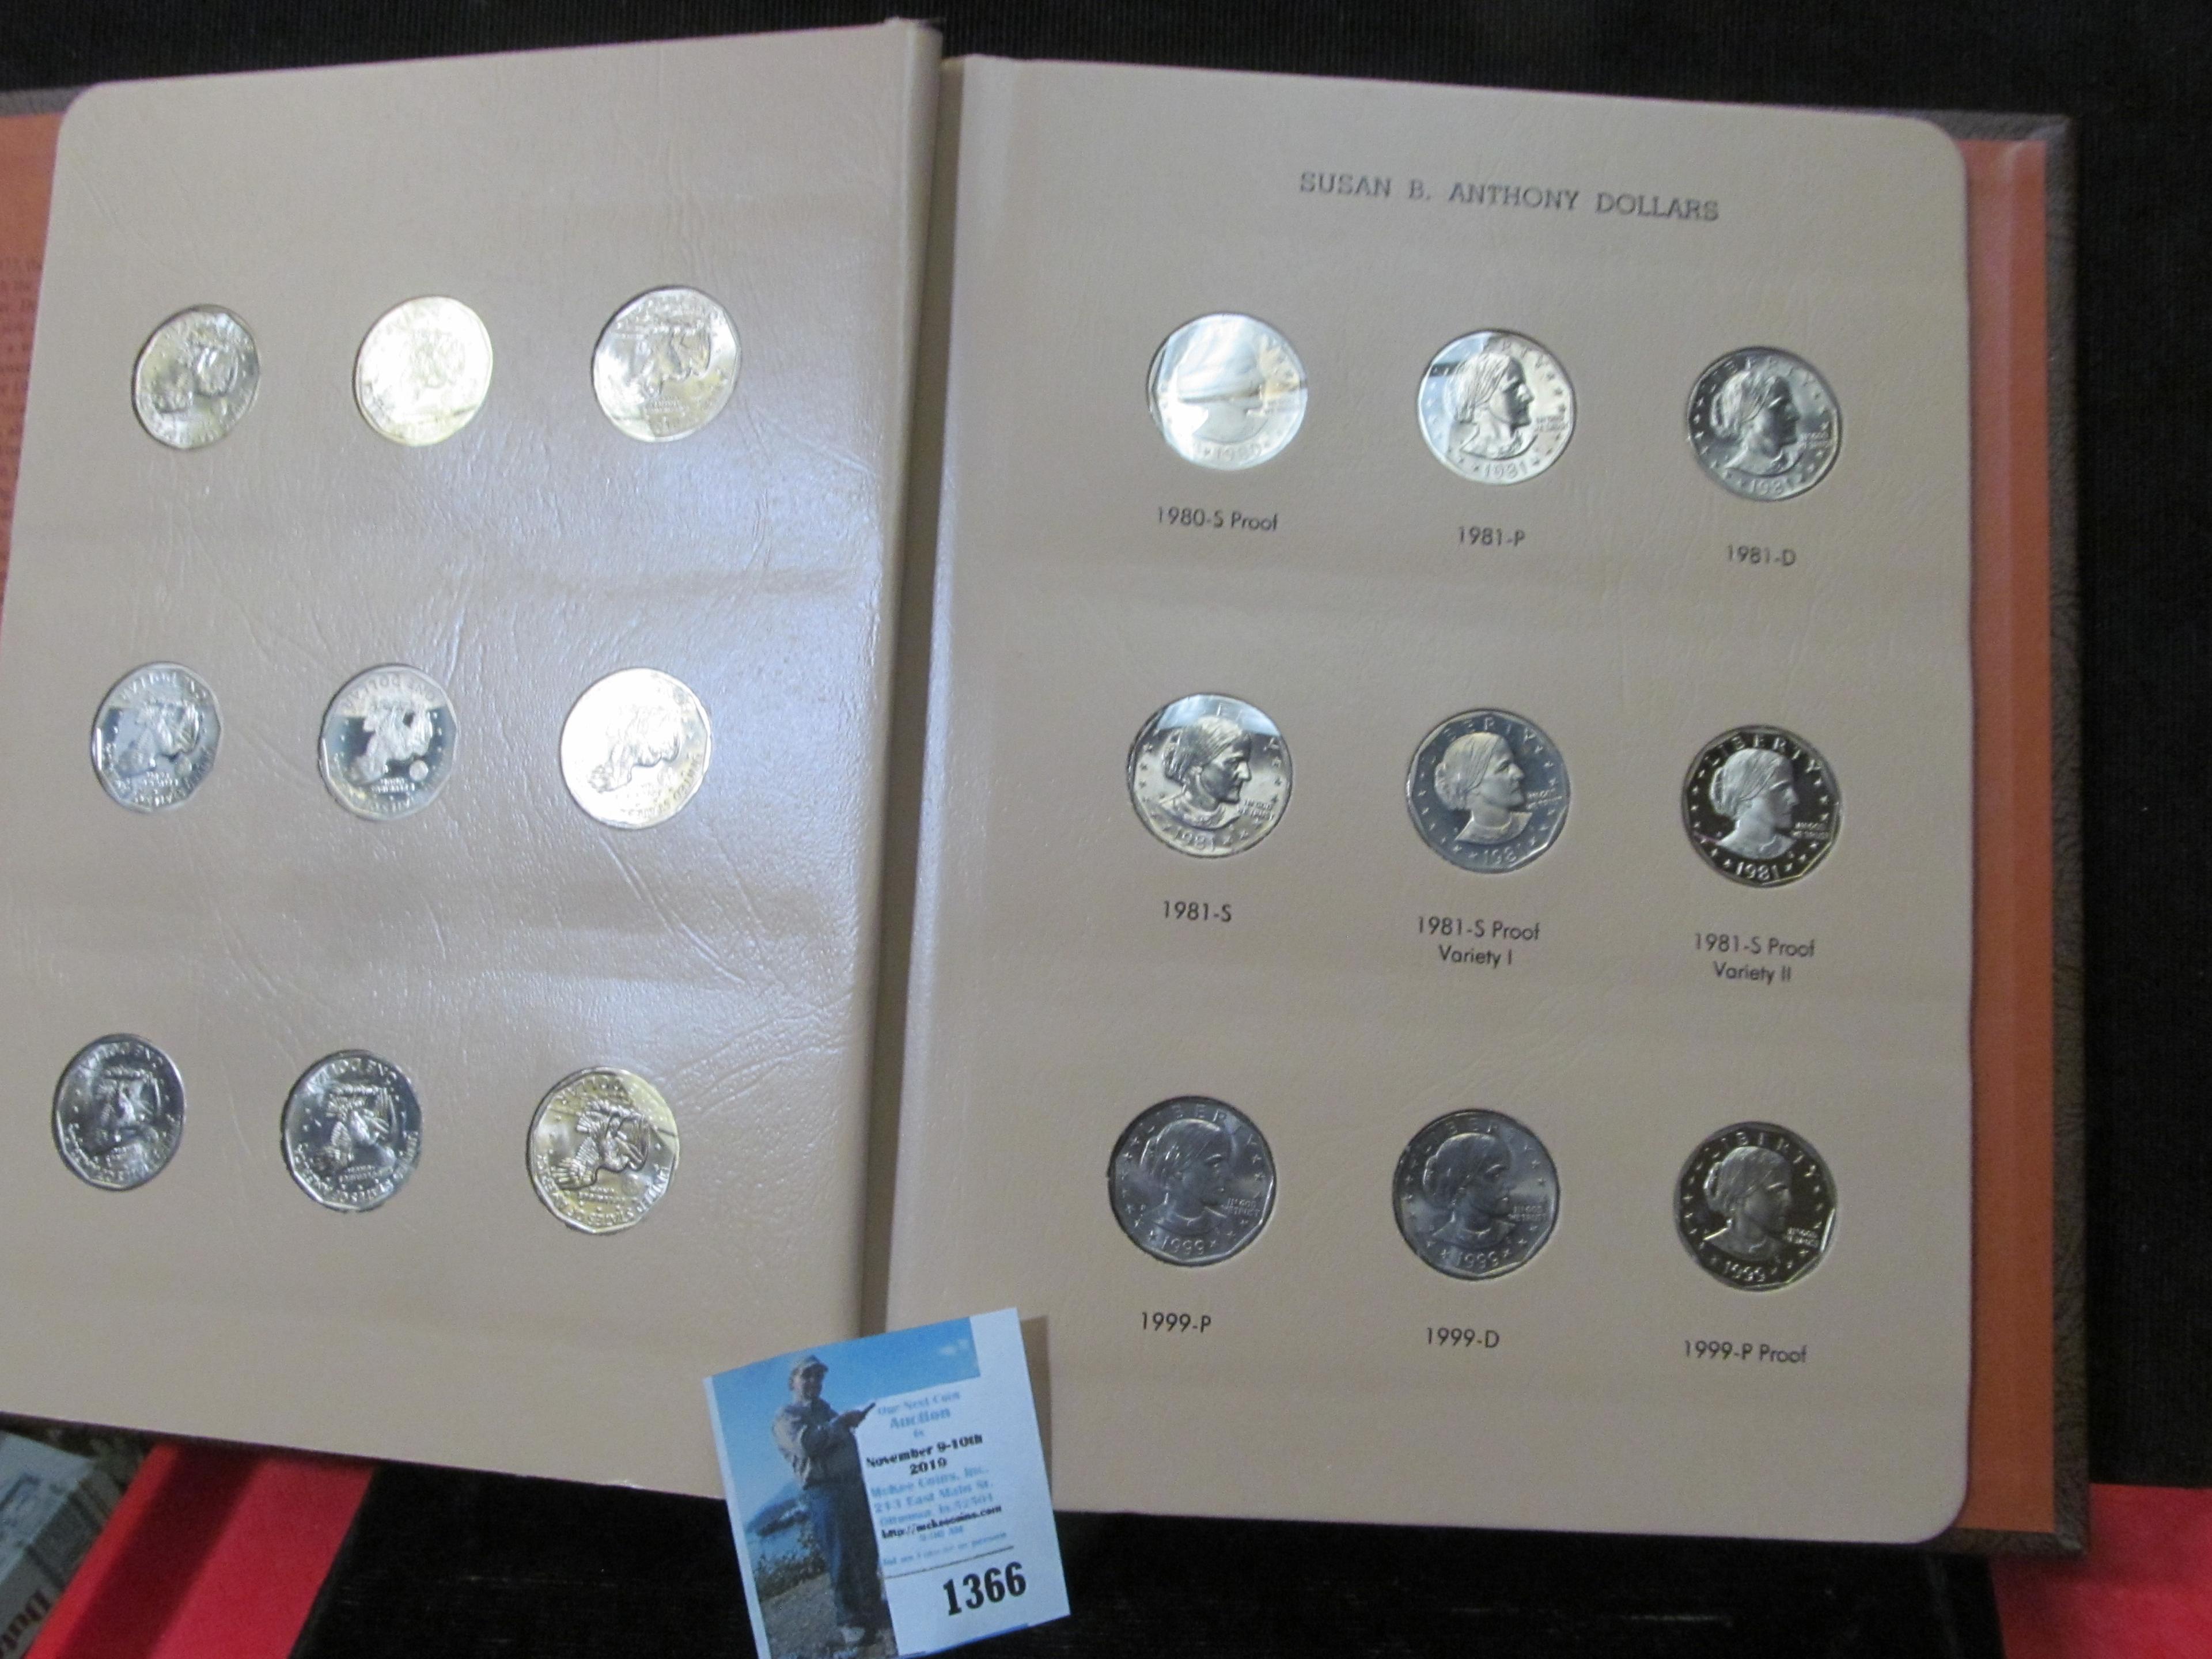 1979-1999 P Complete Set of Susan B. Anthony Dollars in a World Coin Library Album.